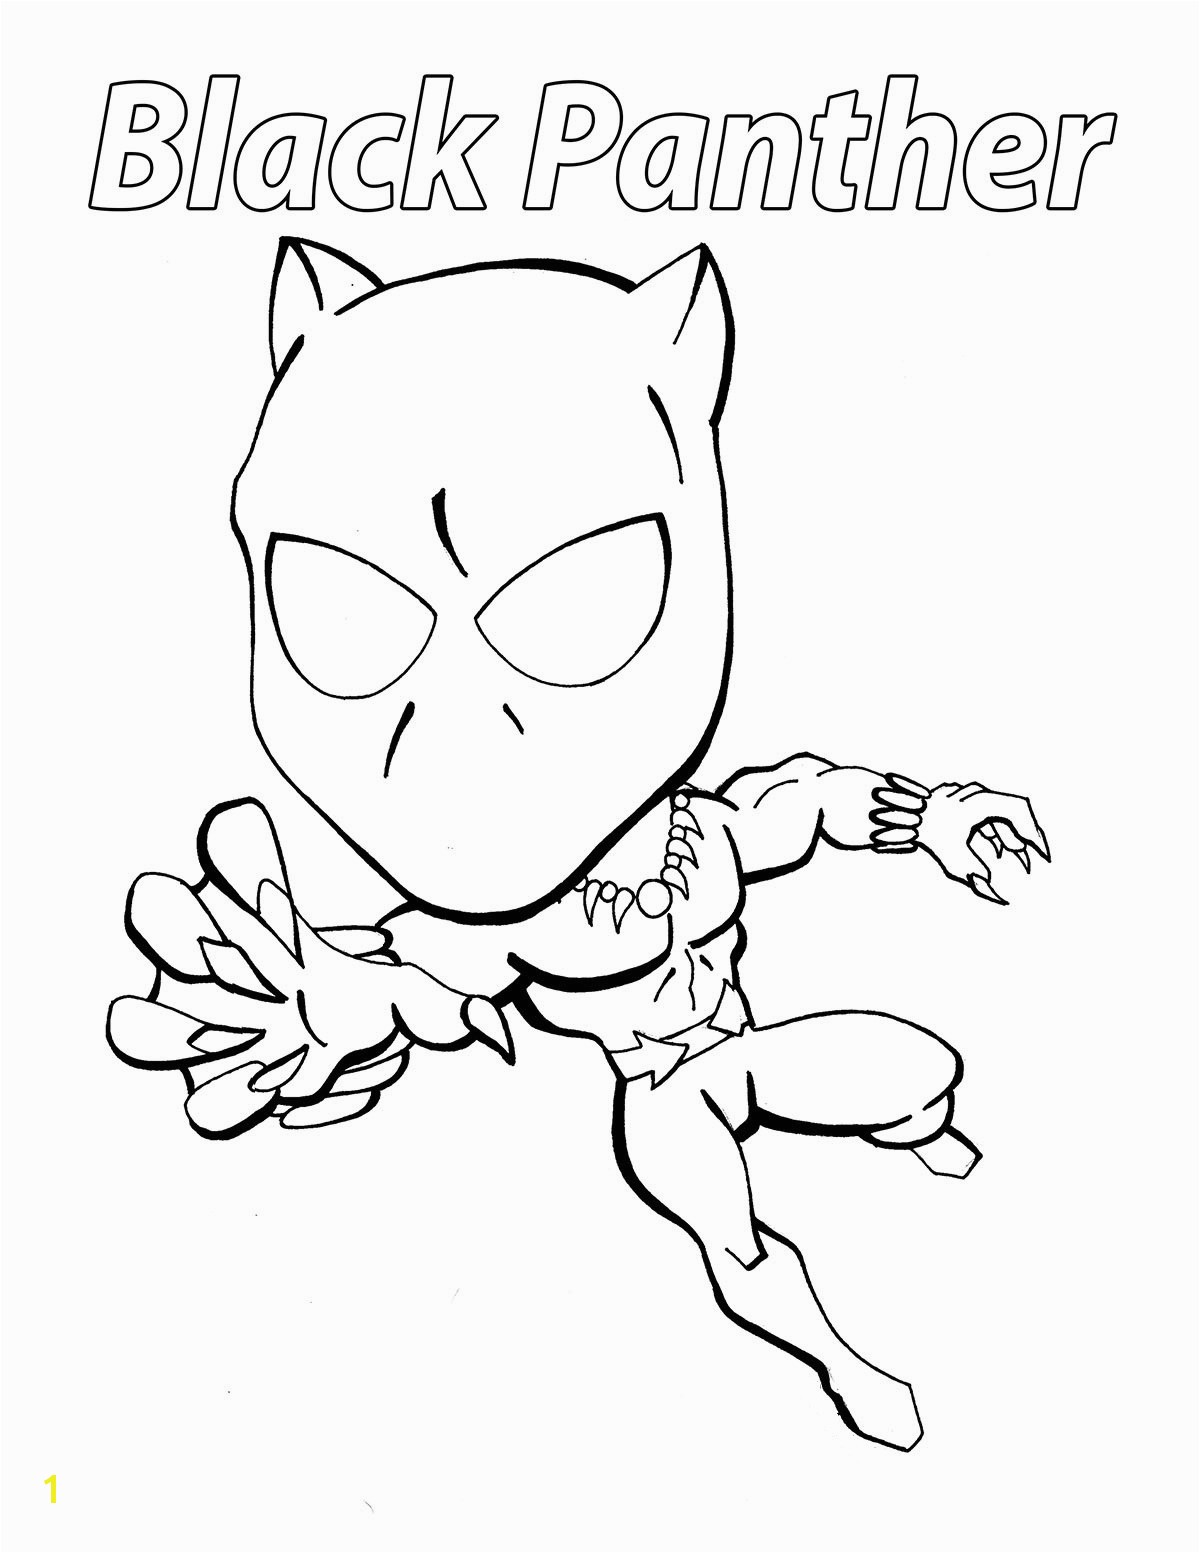 Black Panther Superhero Coloring Pages Marvel Black Panther Coloring Pages Download